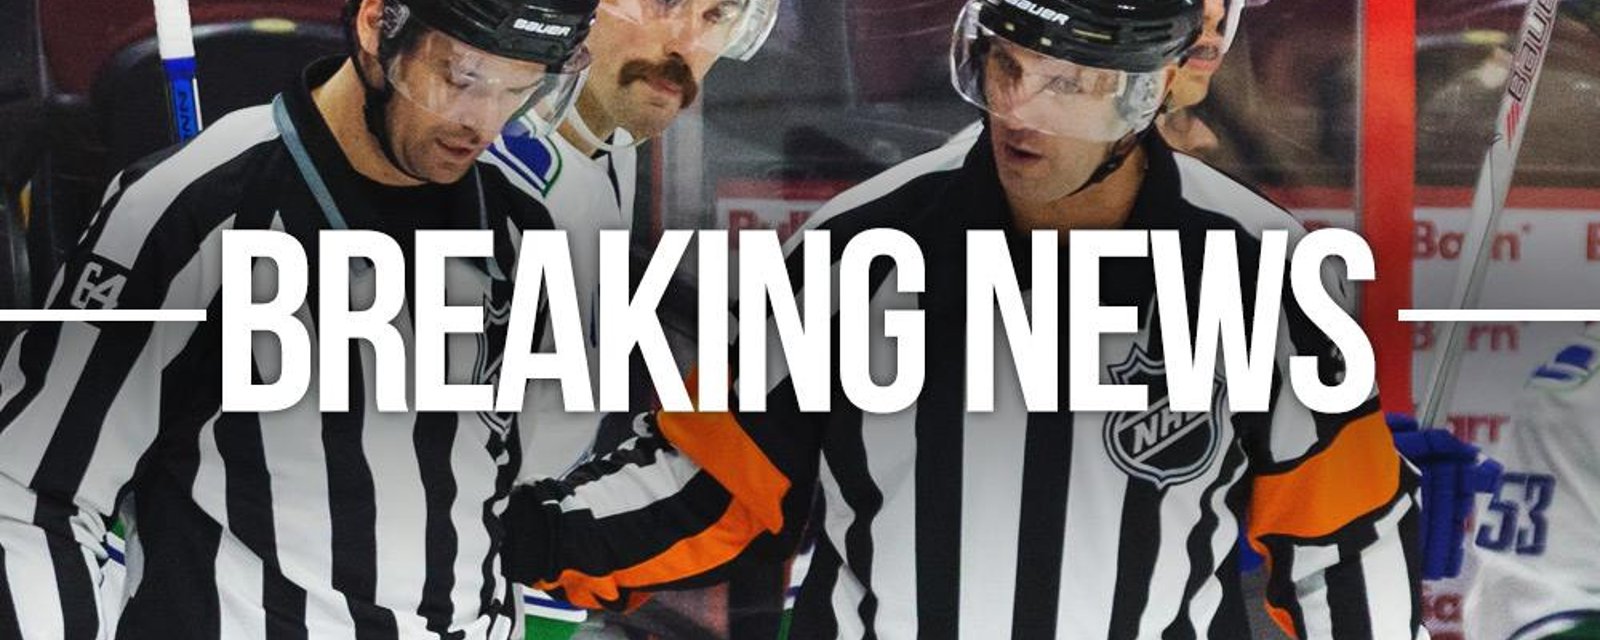 Breaking: Referee accused of showing up drunk for a game.